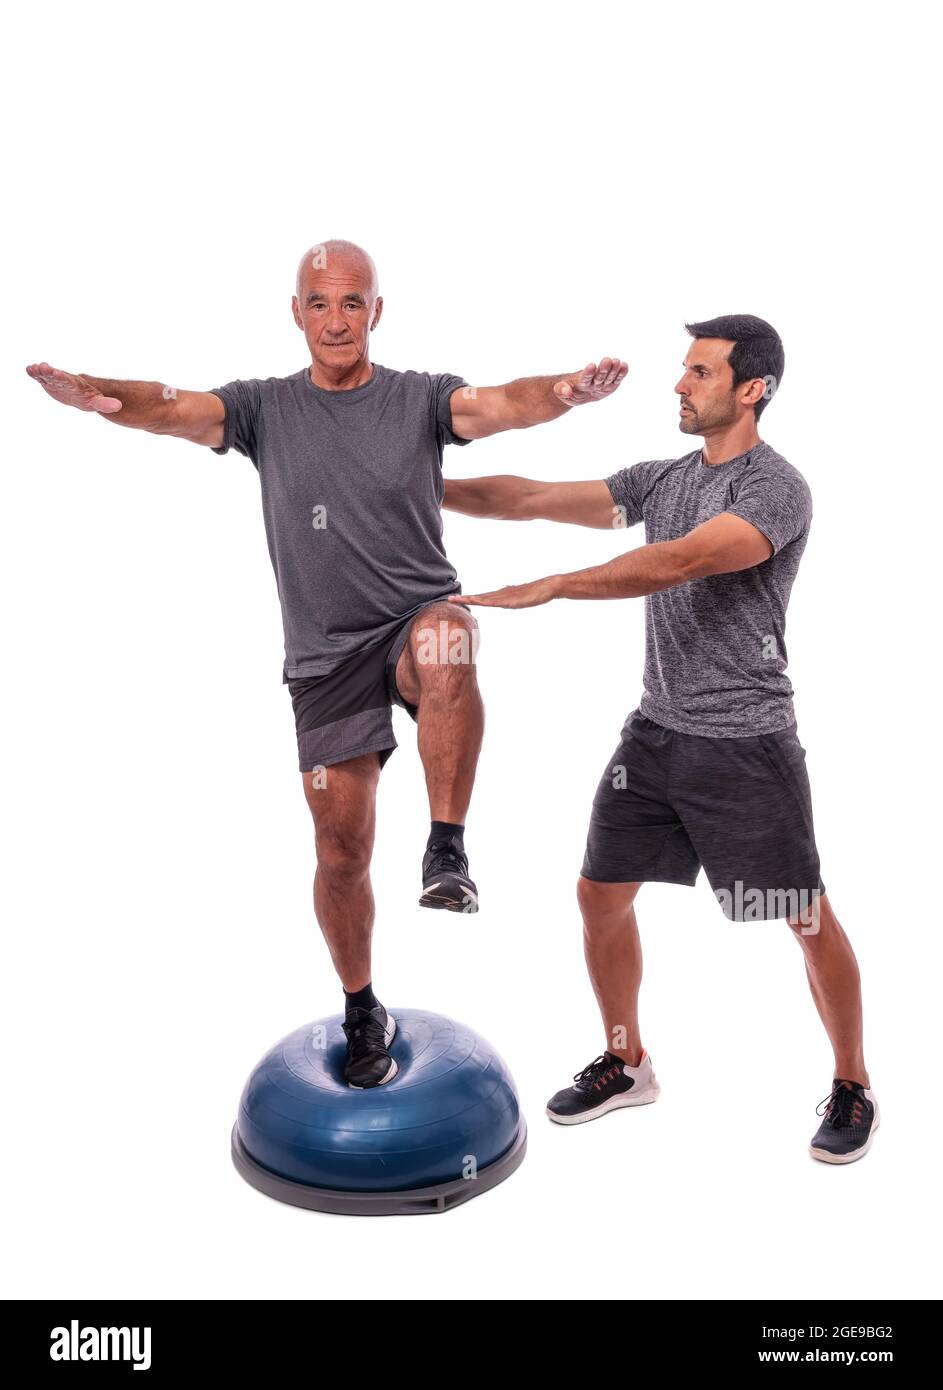 An elderly man doing a balance exercise, on one leg, on a hemisphere ball. With help of a fitness trainer. On a white isolated background. Stock Photo